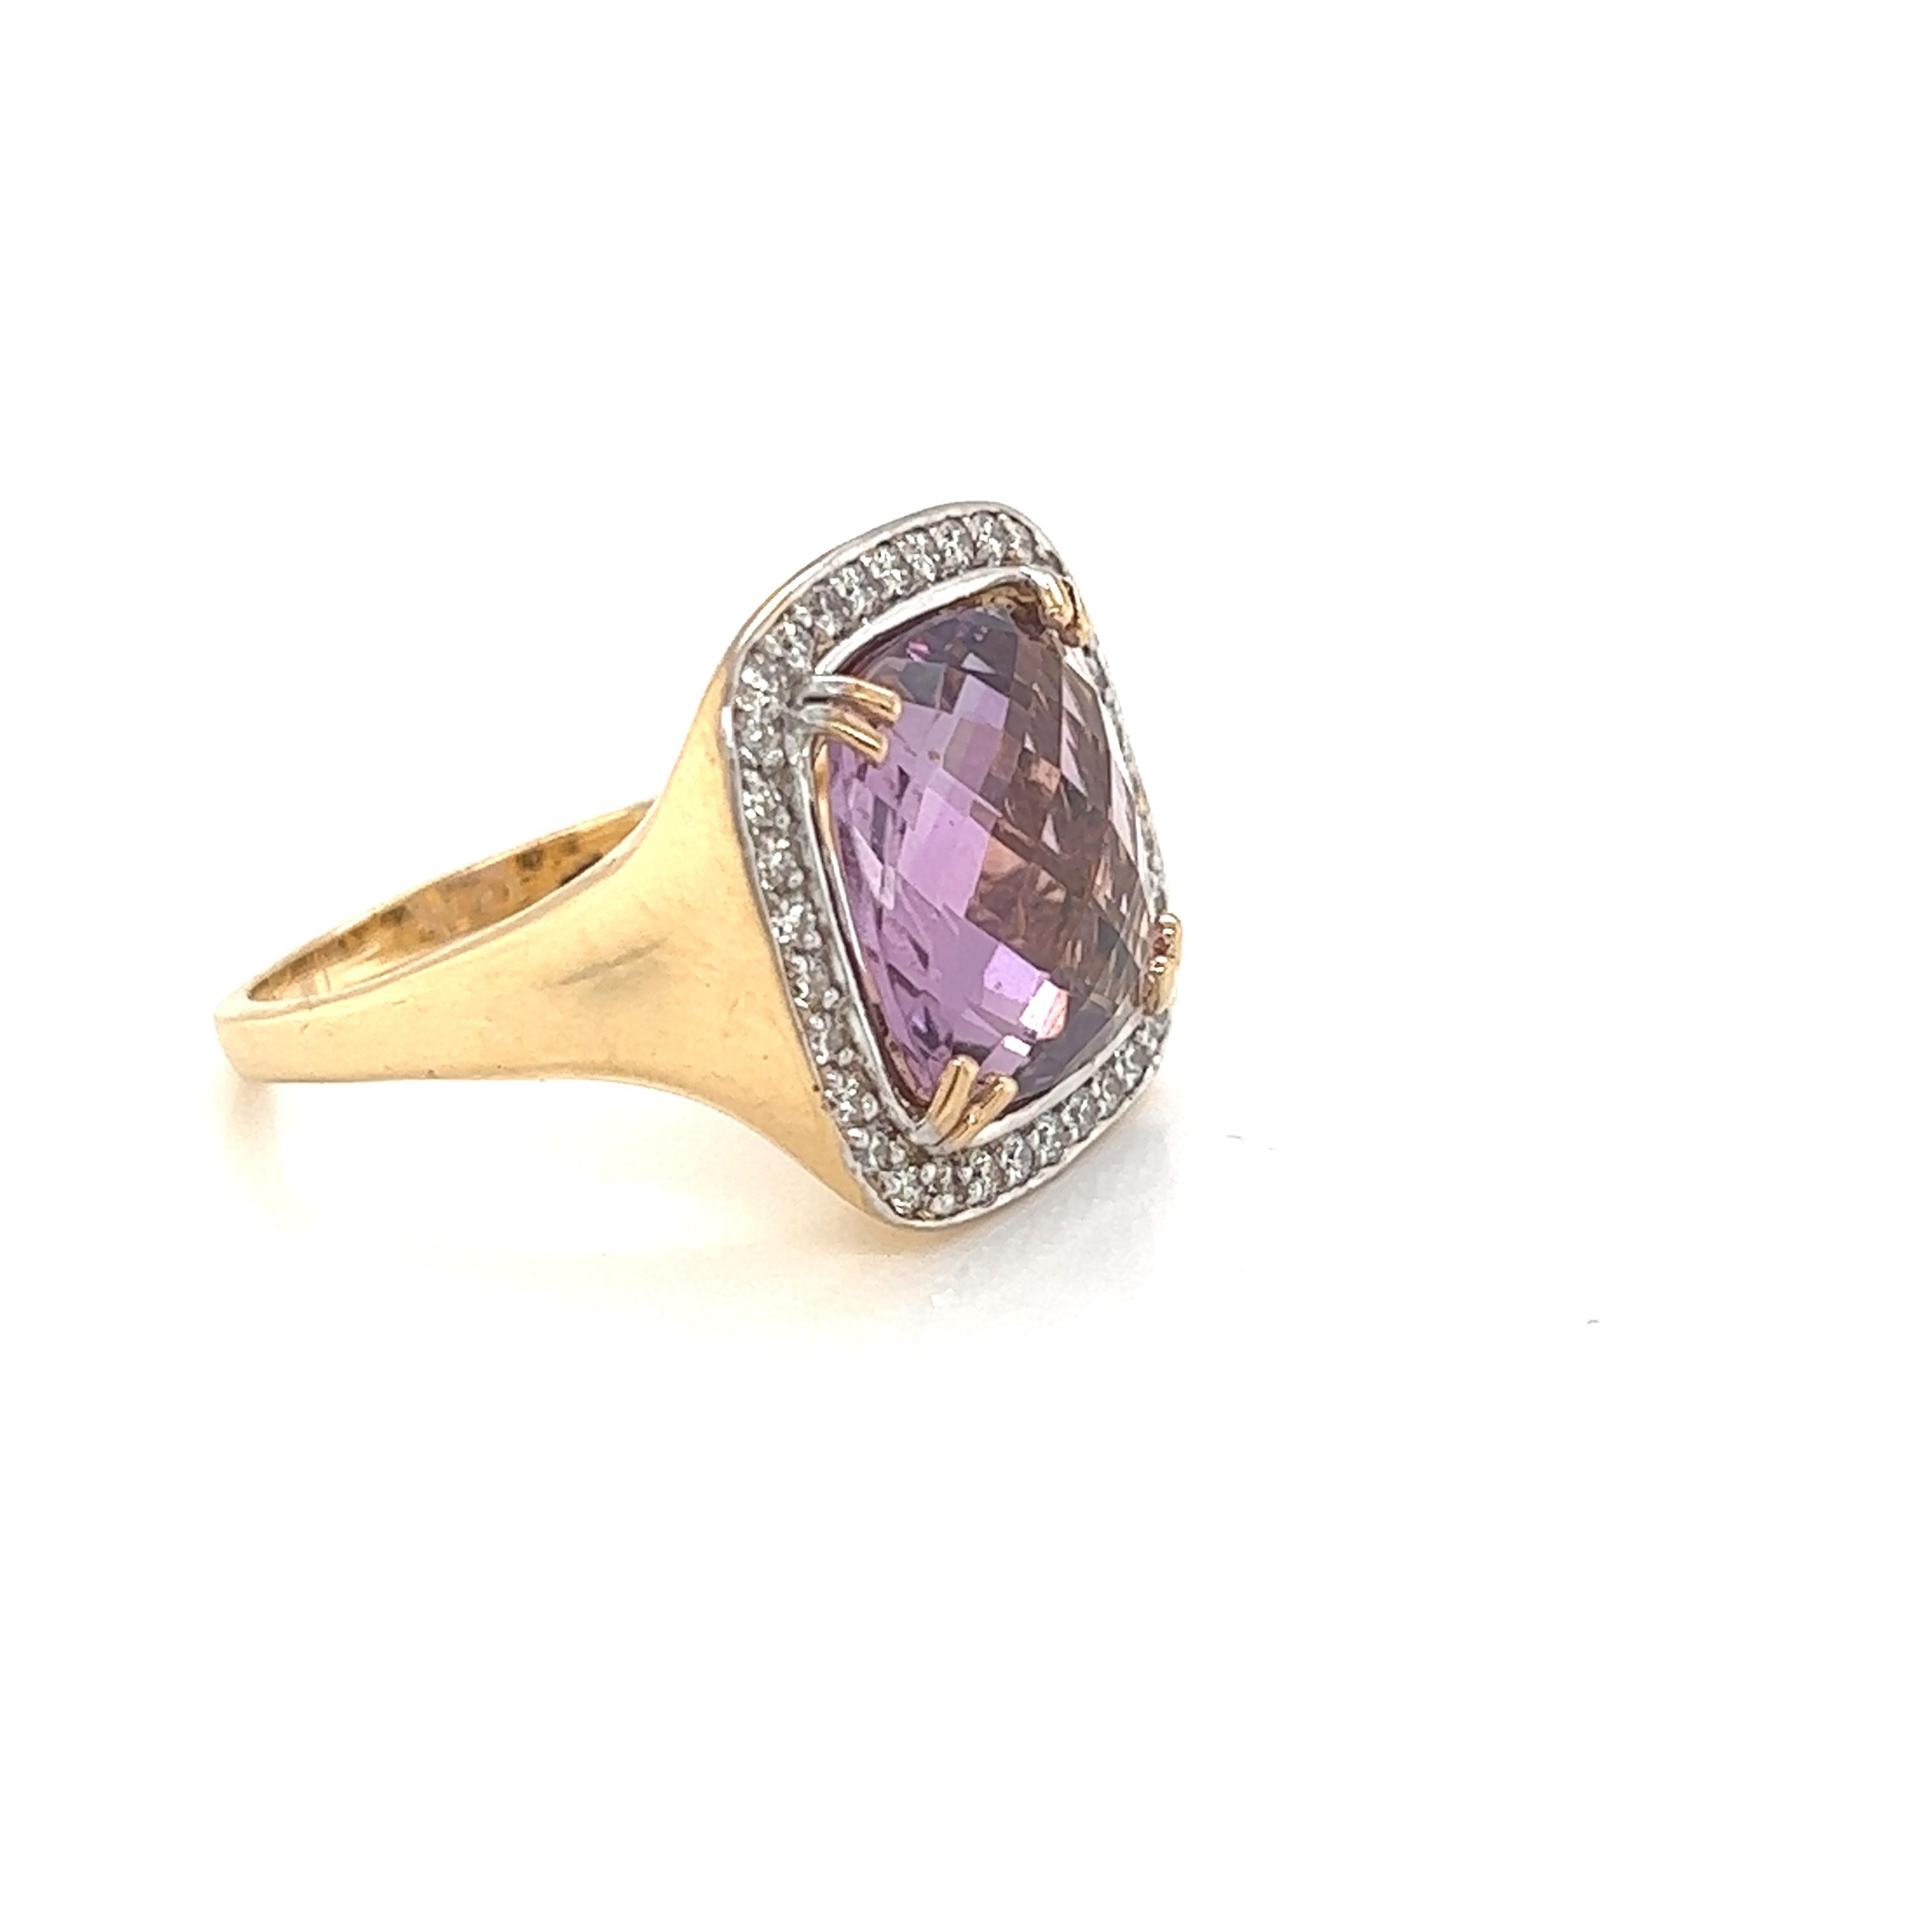 For Sale:  Hand-Crafted 14K Yellow Gold Cocktail Ring Set with an Amethyst Color Stone 2